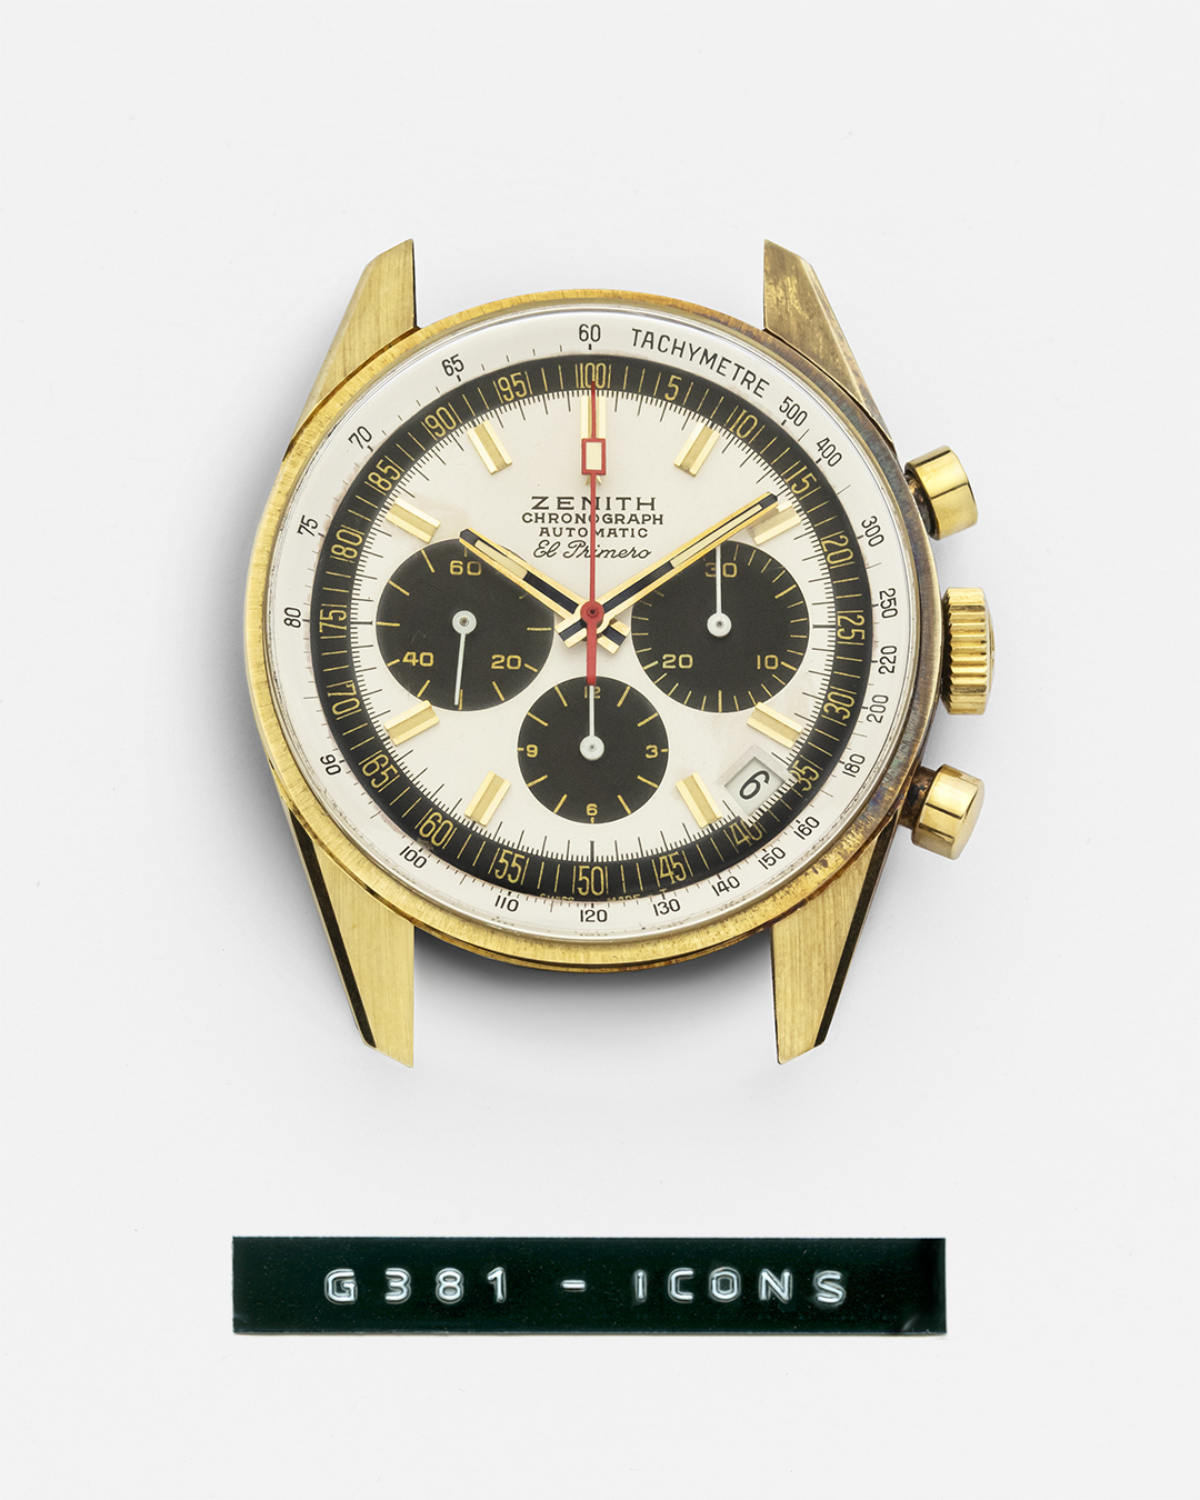 Zenith Brings Its Icons Collection To The Online Boutique